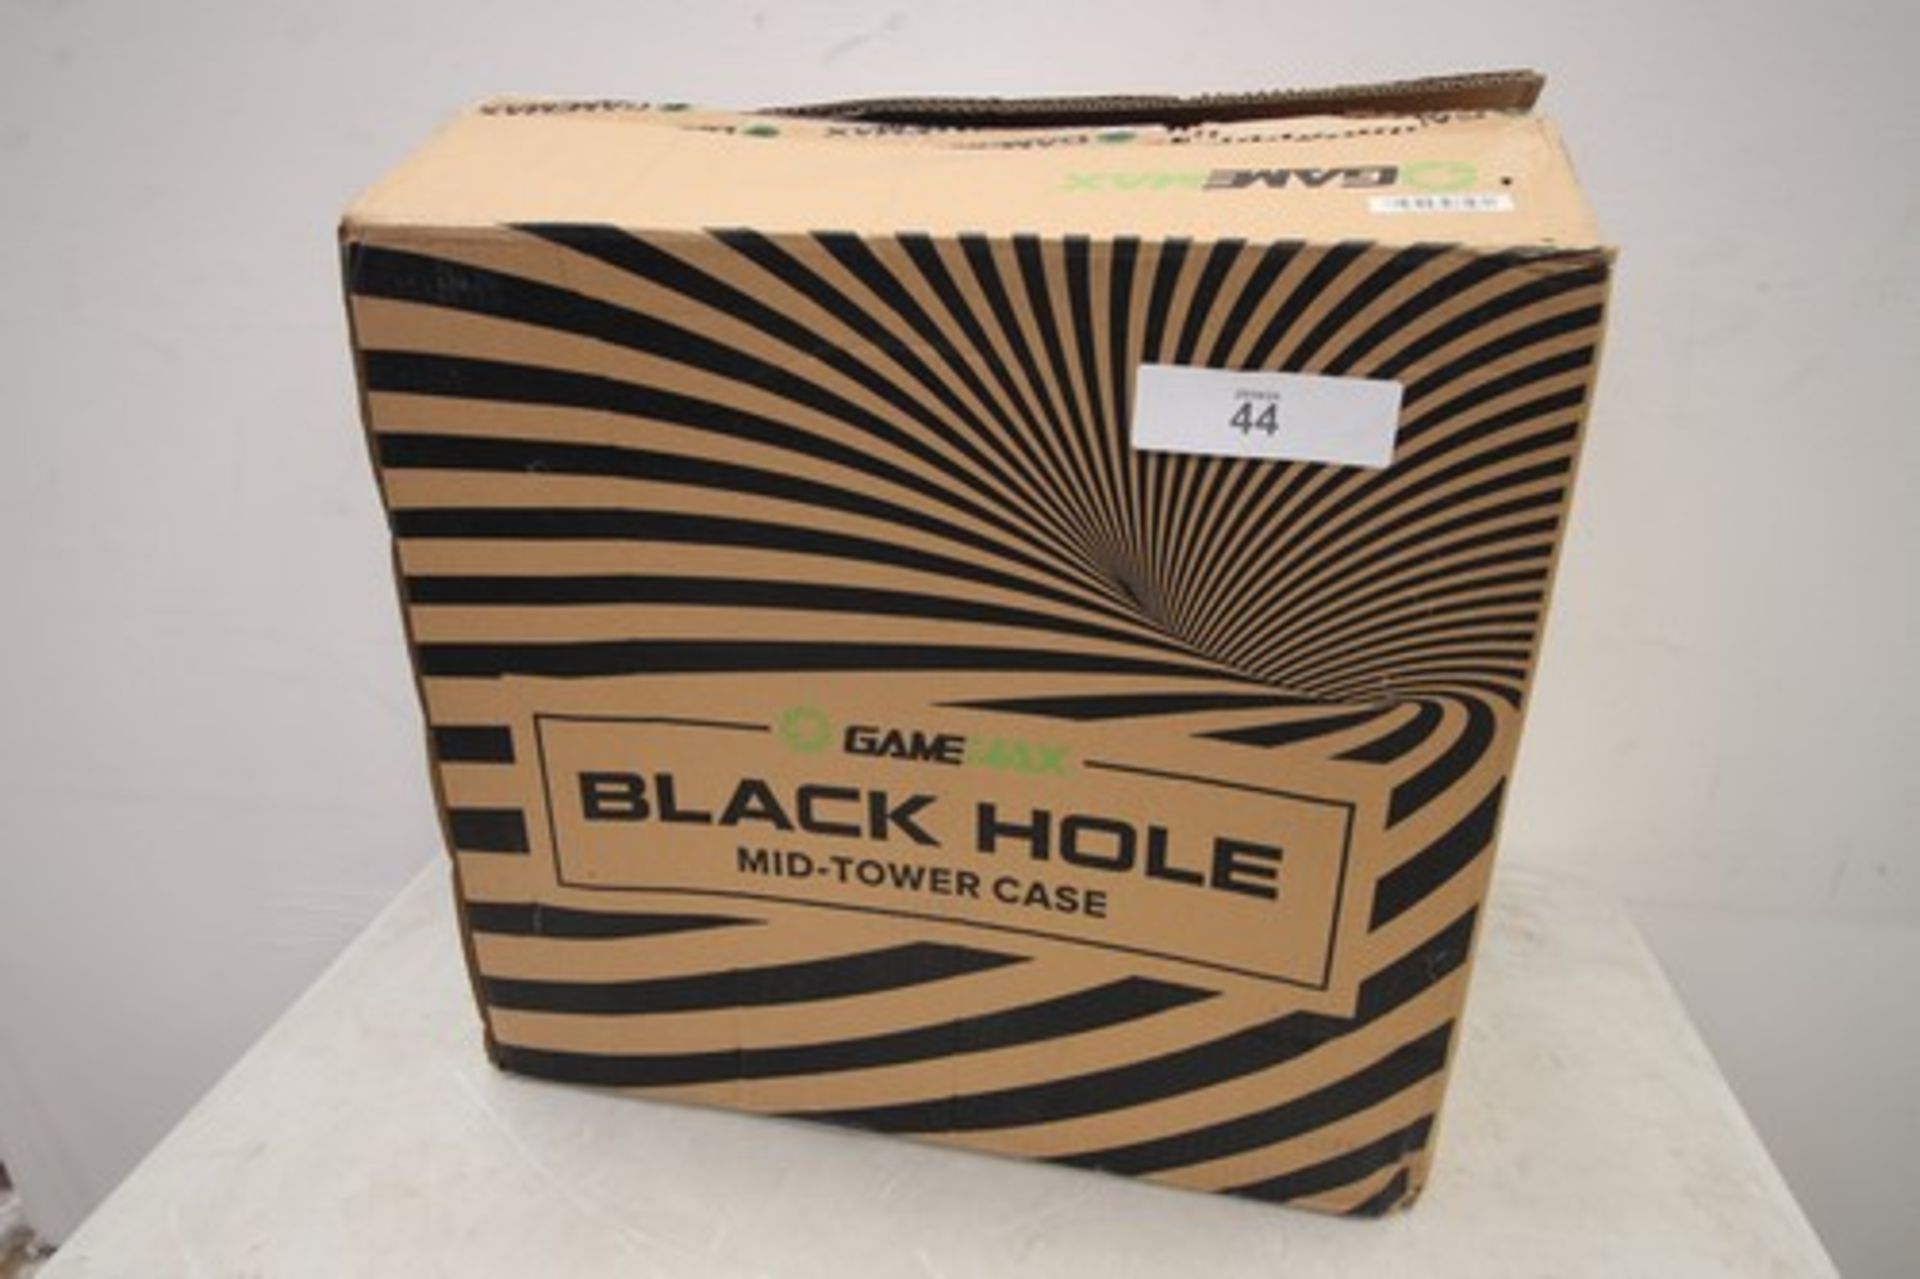 1 x Game Max black hole mid tower PC case, model: 3603-TB - new in box (ES2) - Image 4 of 4